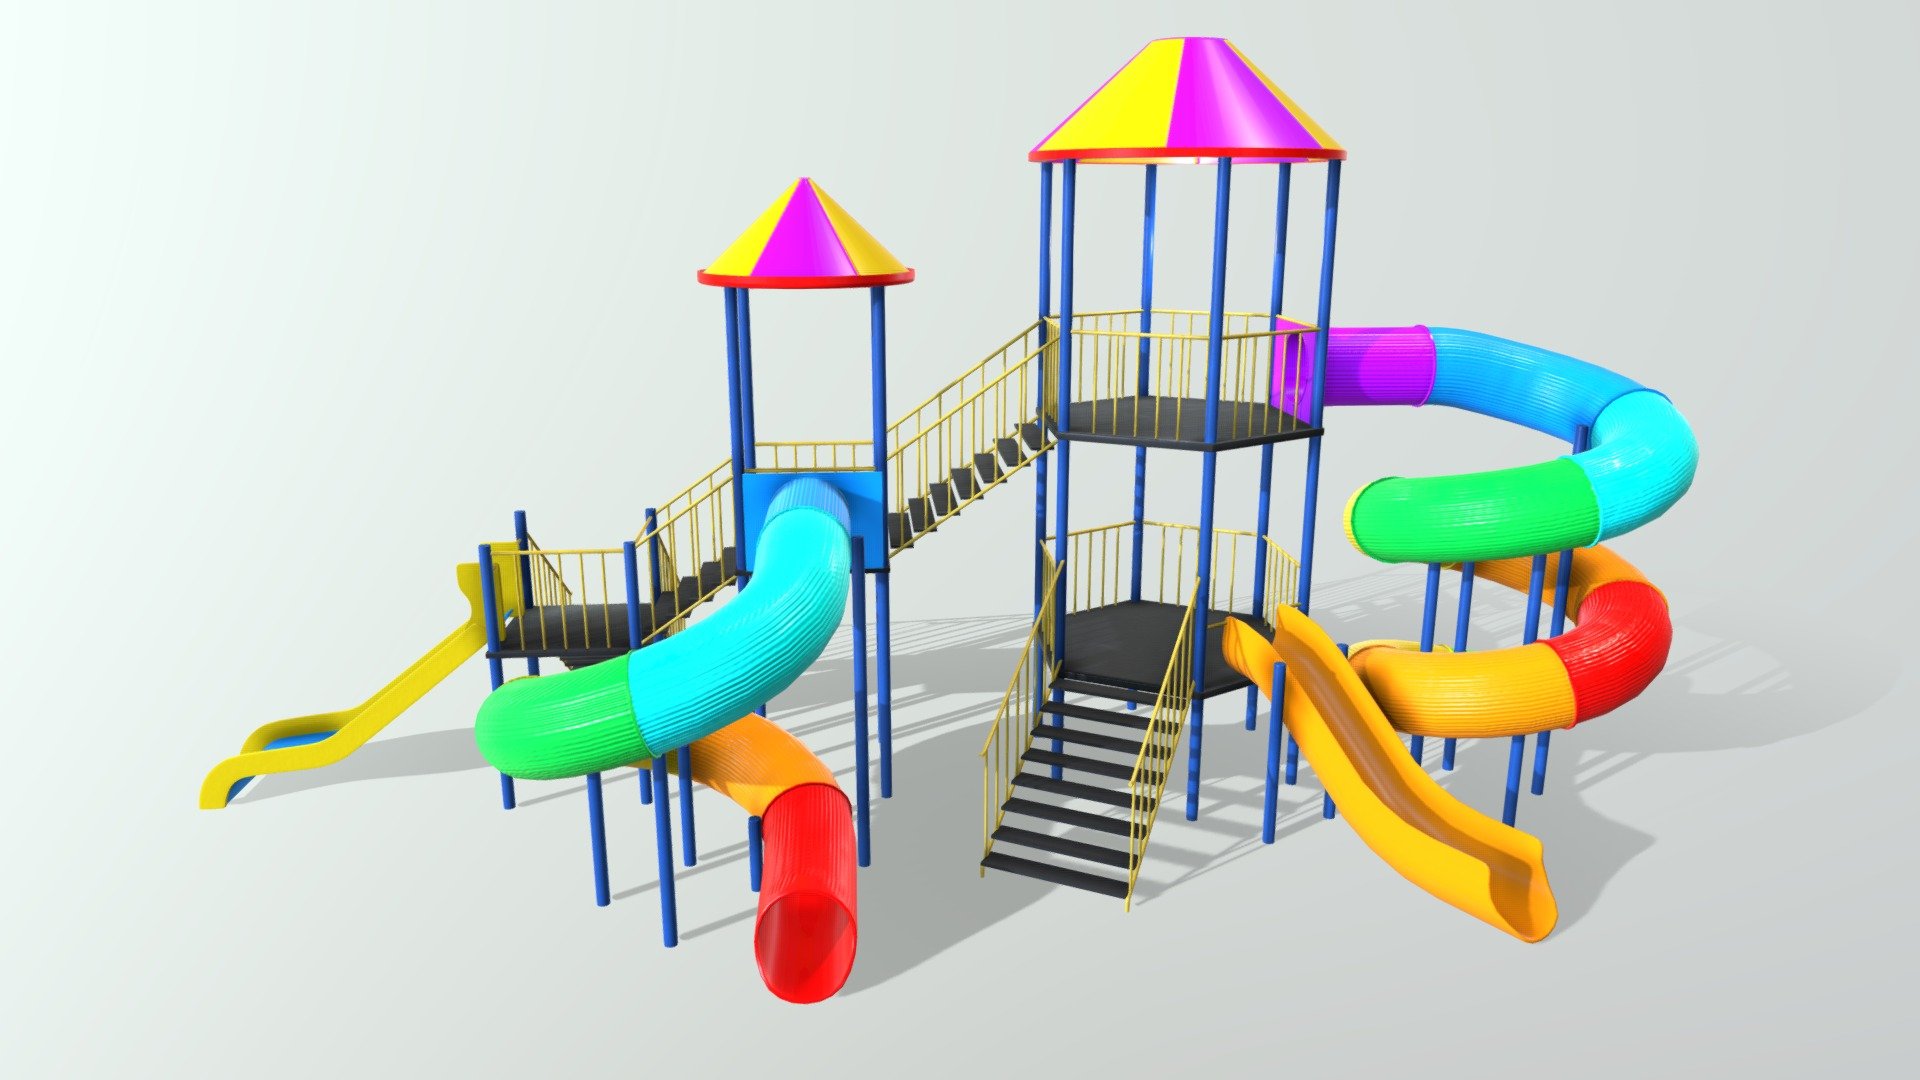 This model of slides is a dream for children and nice addition to your project. 
3d model ready for Virtual Reality (VR), Augmented Reality (AR), games and other real-time apps 3d model